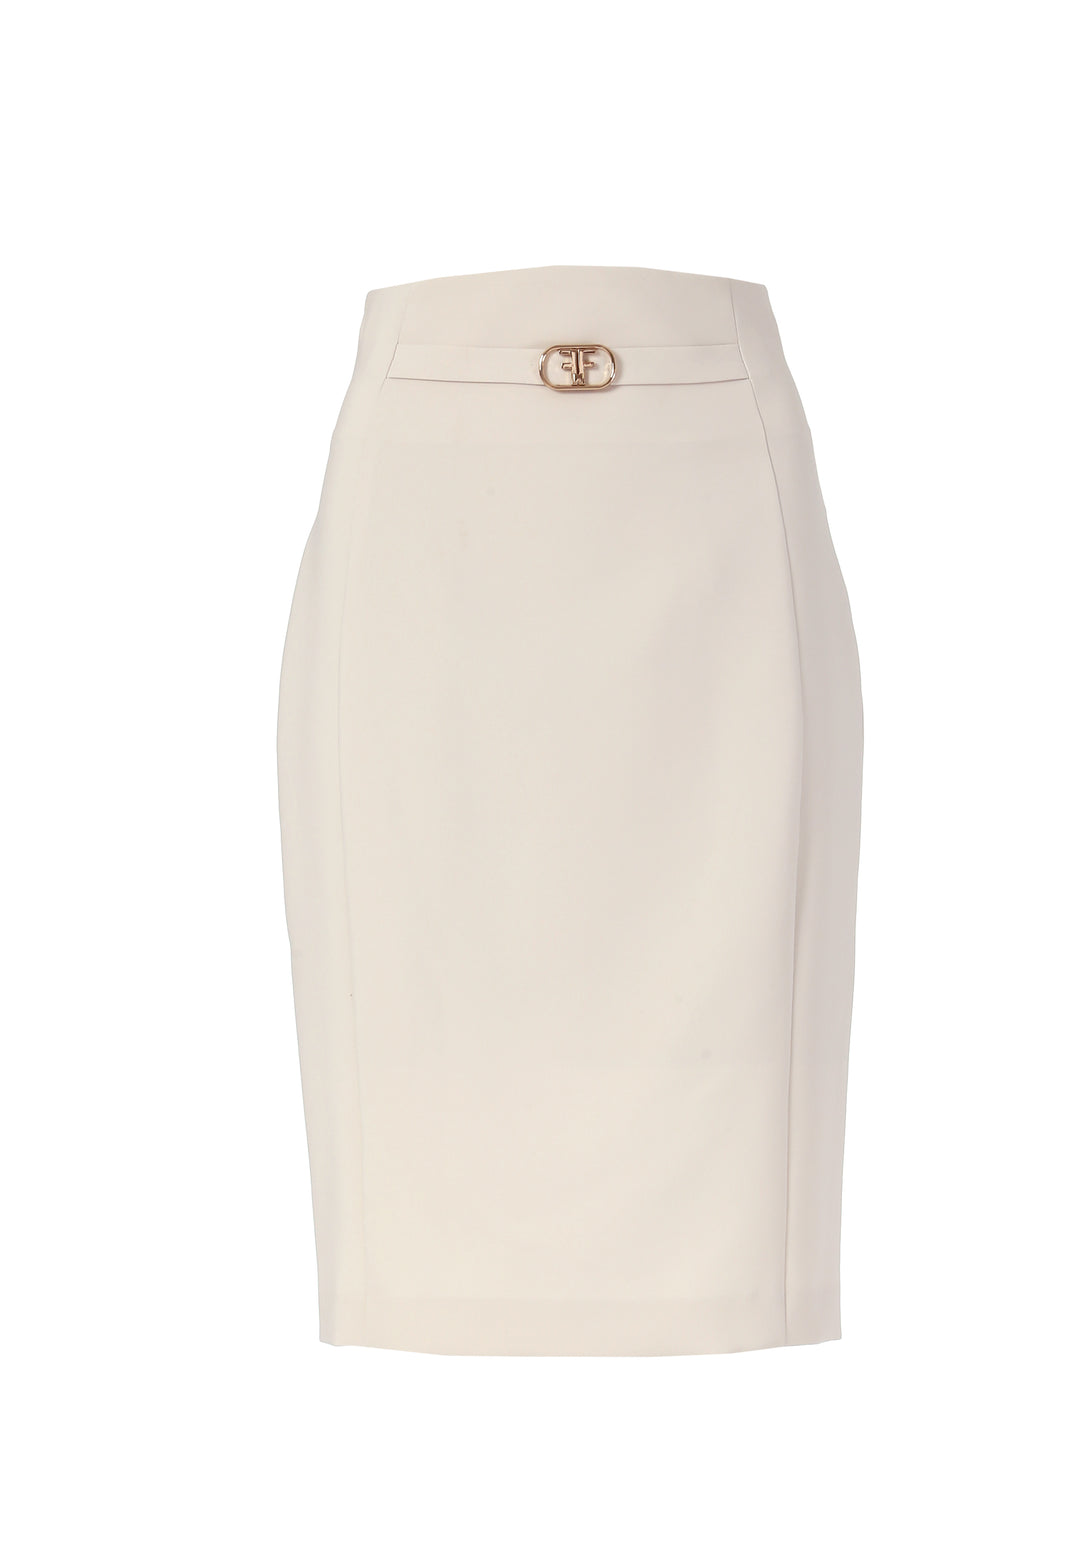 Sheath skirt middle length made in technical fabric